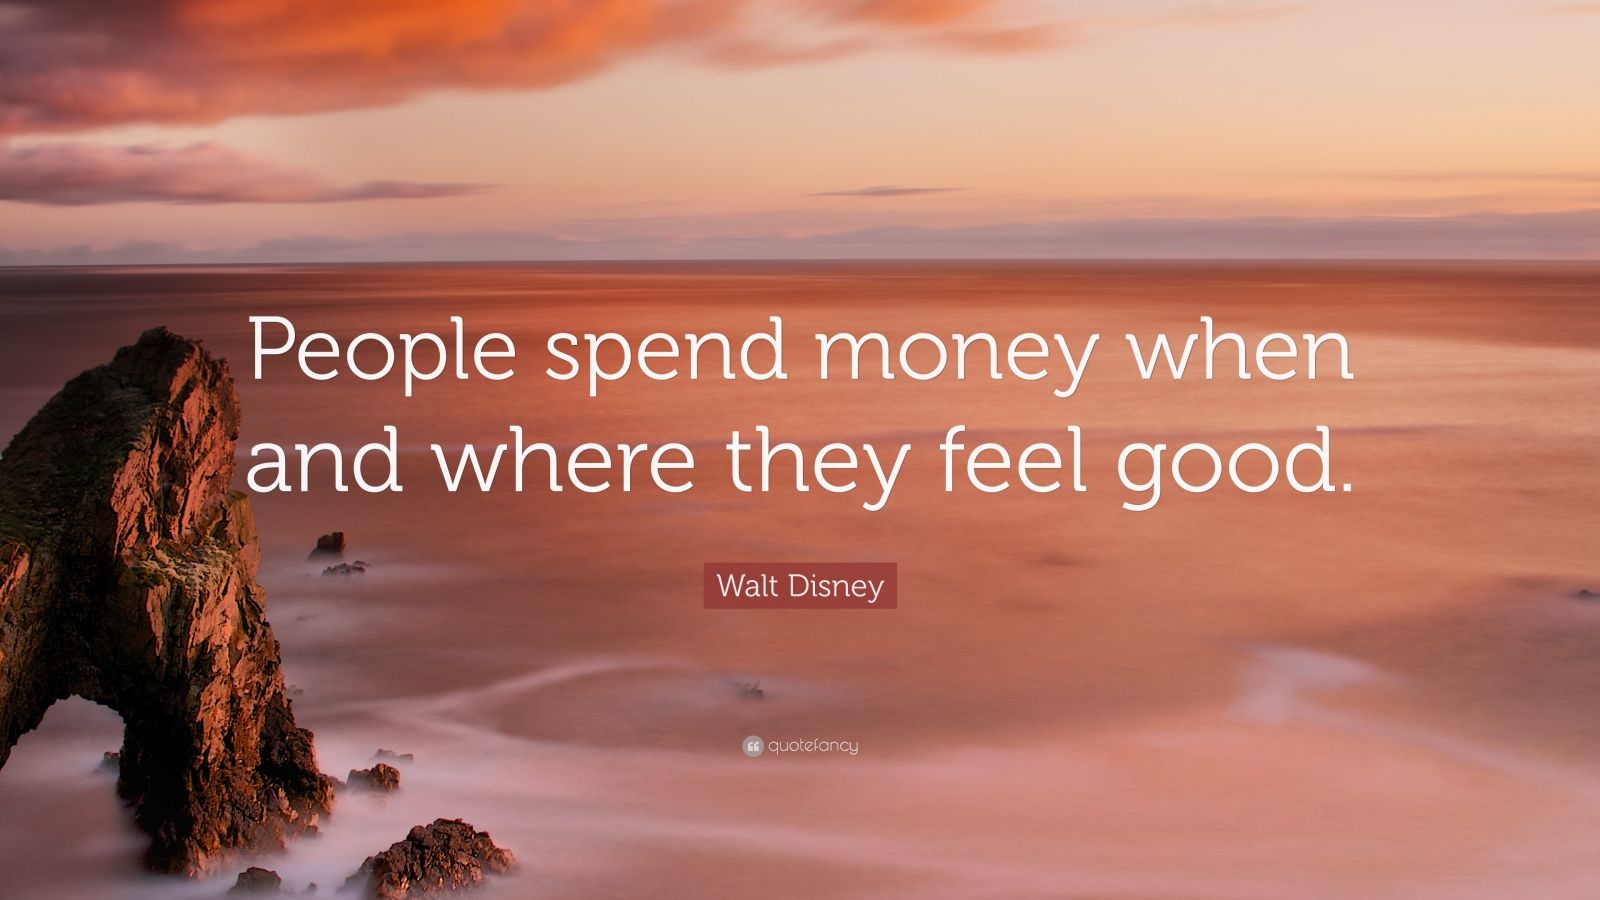  Walt  Disney  Quote  People spend money when and where they 